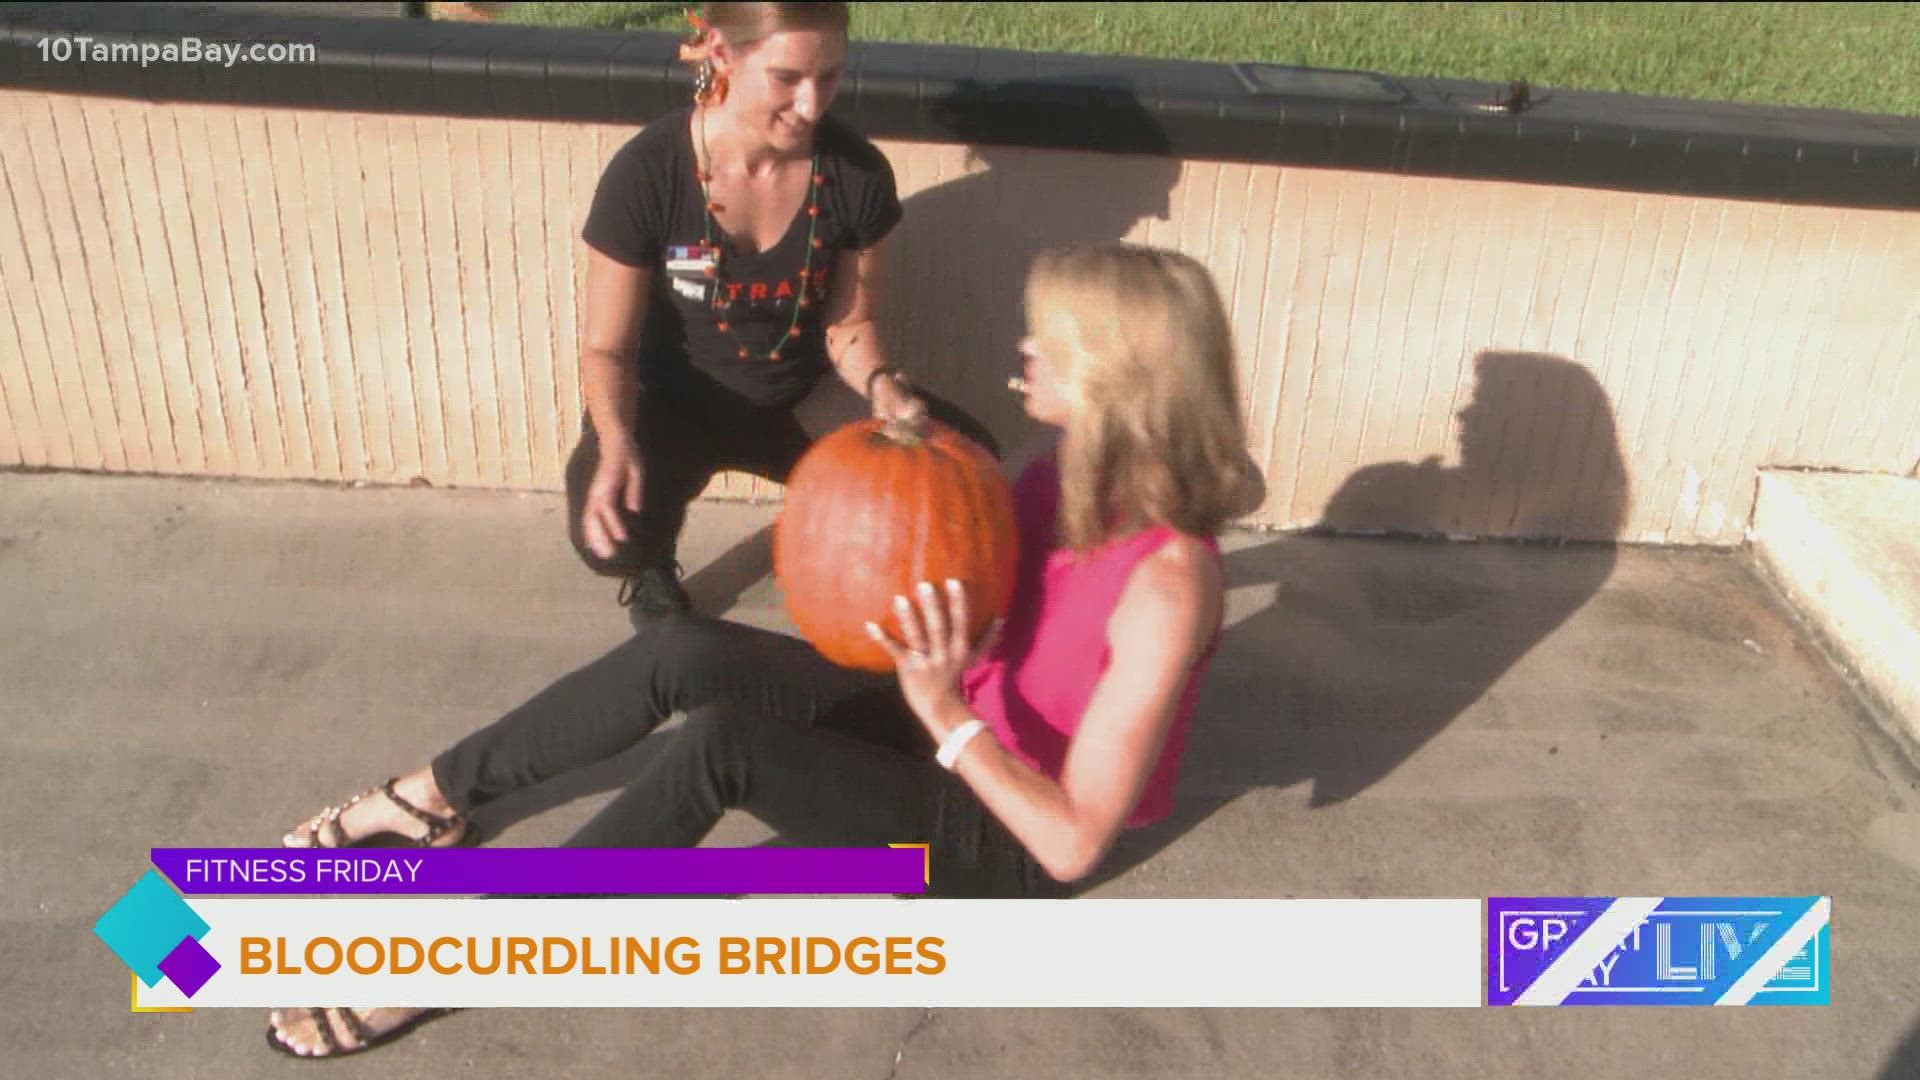 Deadlifts, corpse crunches and spider crawls will help you get into the Halloween spirit.